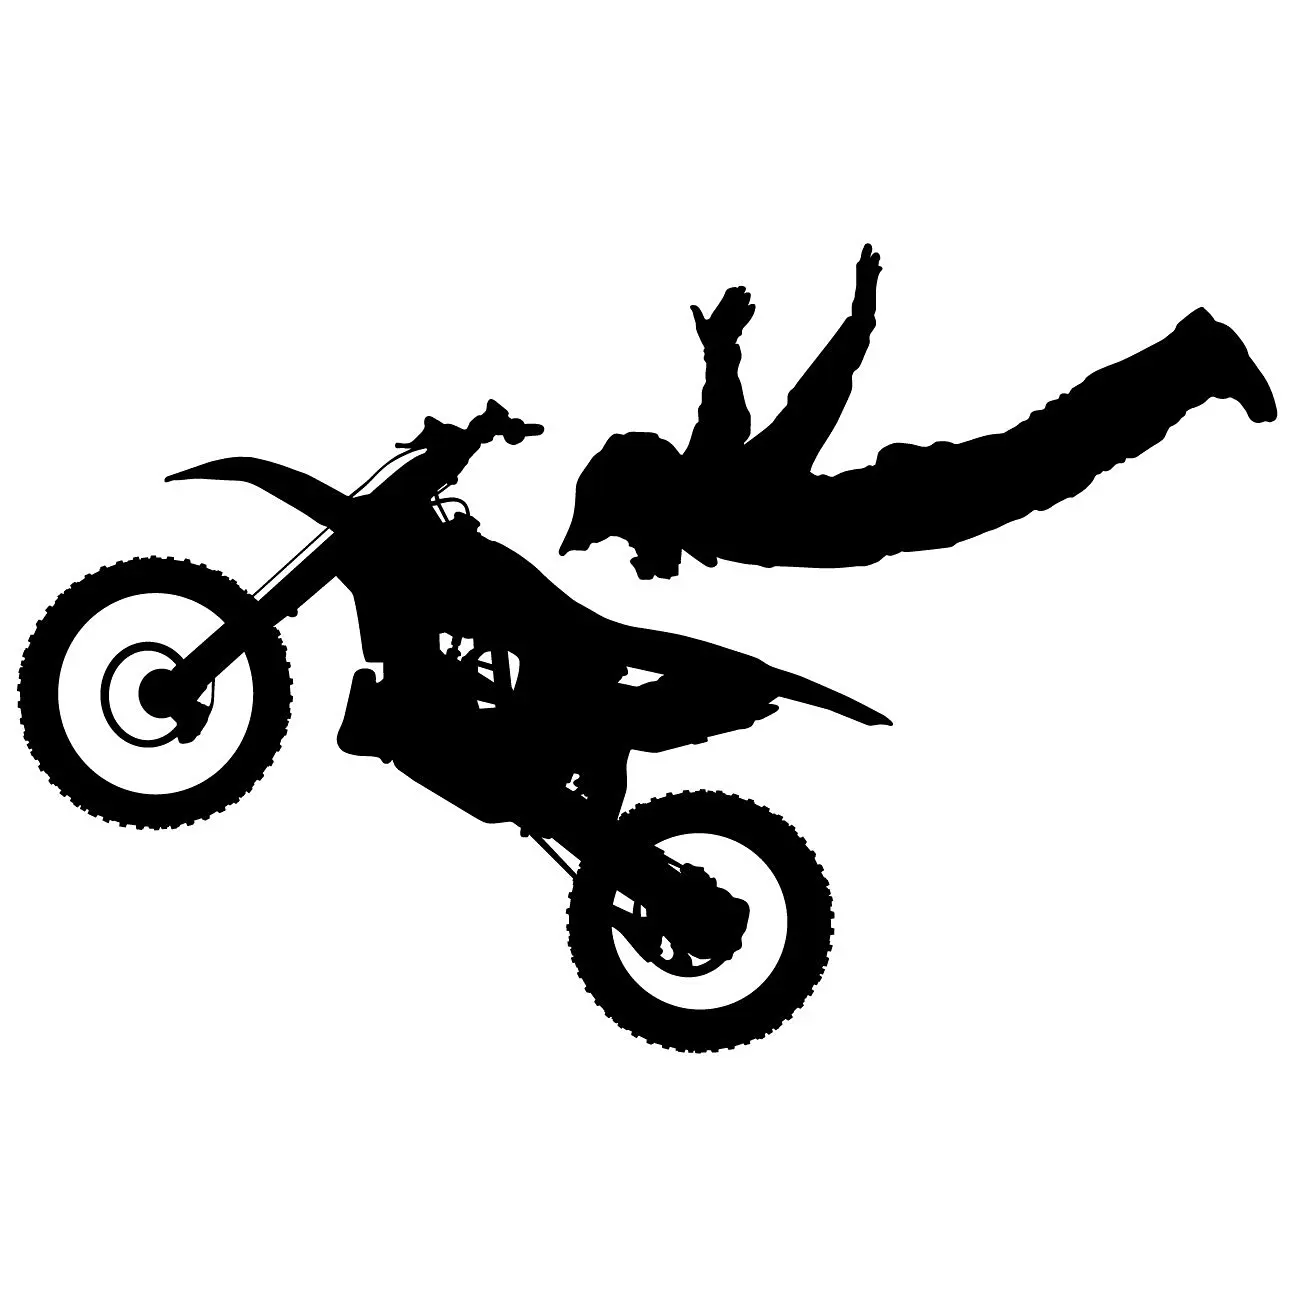 Cheap Motocross Decal Kits Find Motocross Decal Kits Deals On